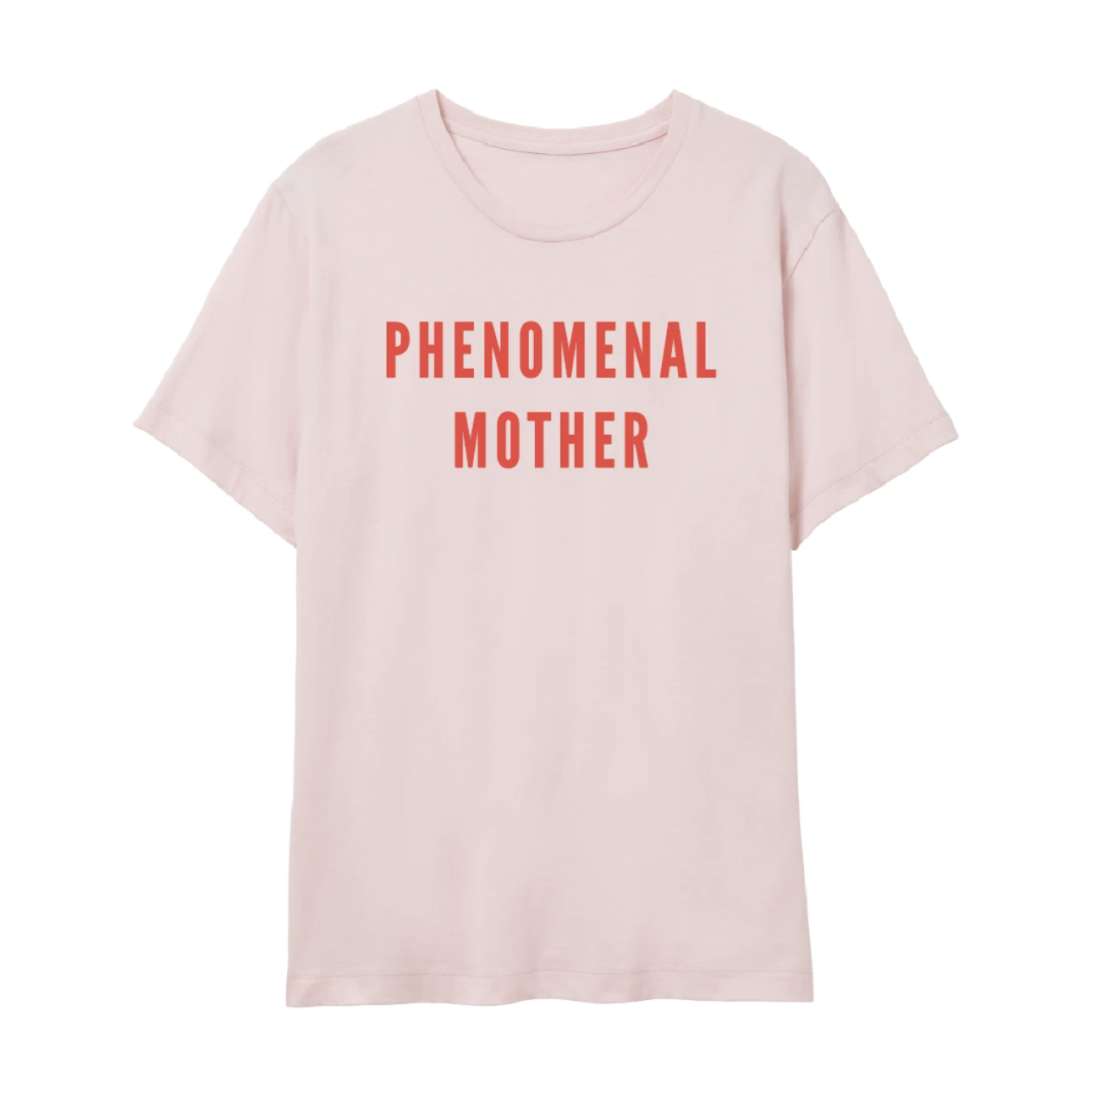 Pink t-shirt with red text on it that says phenomenal mother